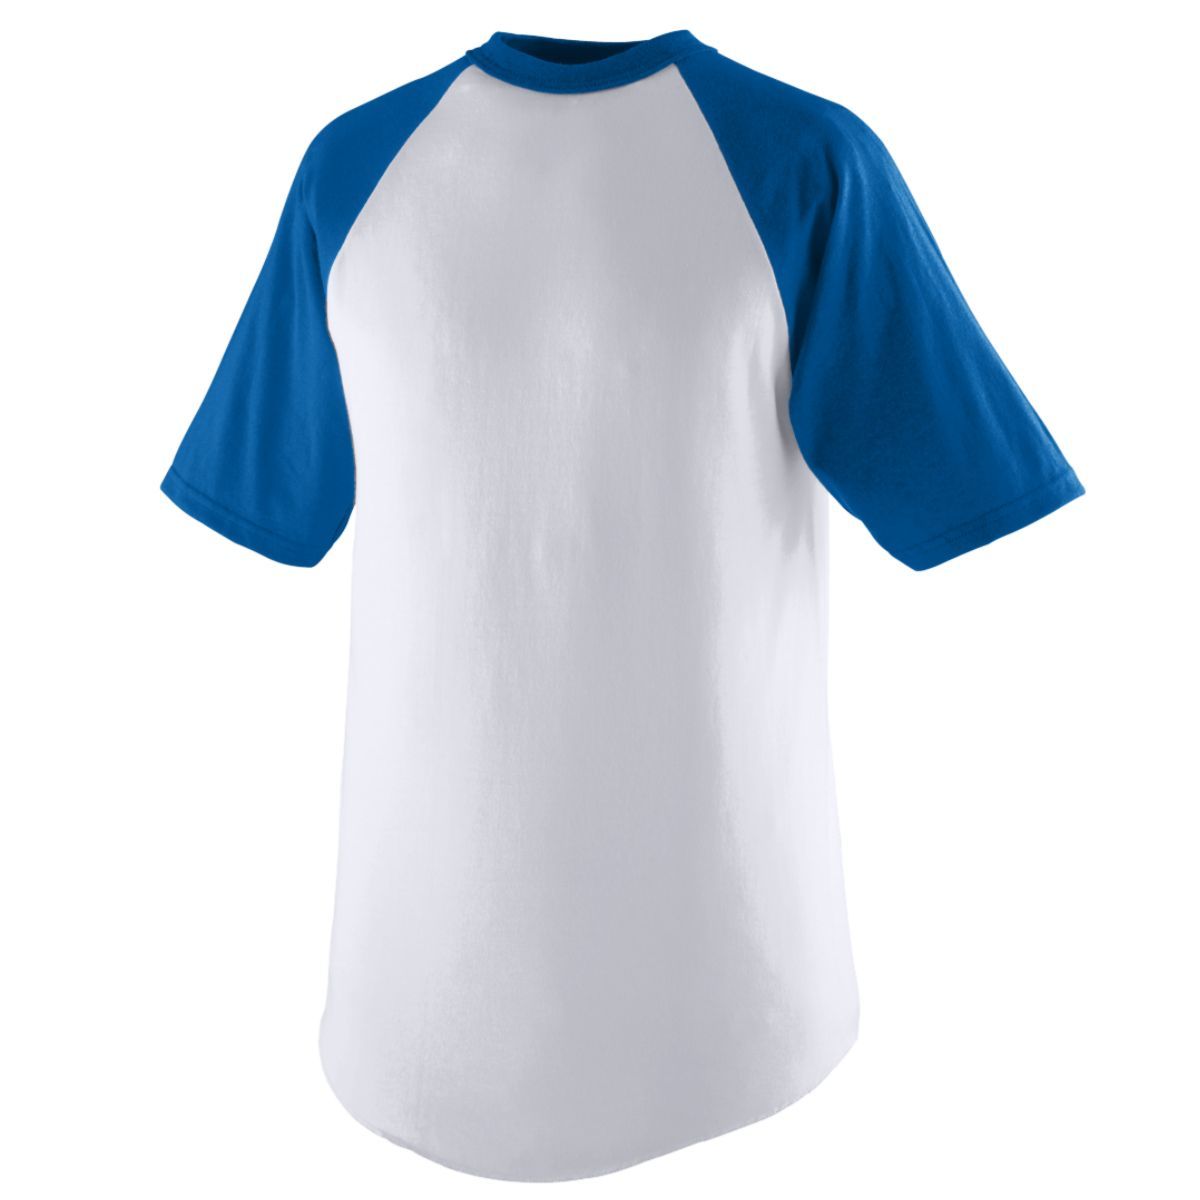 Augusta Sportswear Youth Short Sleeve Baseball Jersey in White/Royal  -Part of the Youth, Youth-Jersey, Augusta-Products, Baseball, Shirts, All-Sports, All-Sports-1 product lines at KanaleyCreations.com